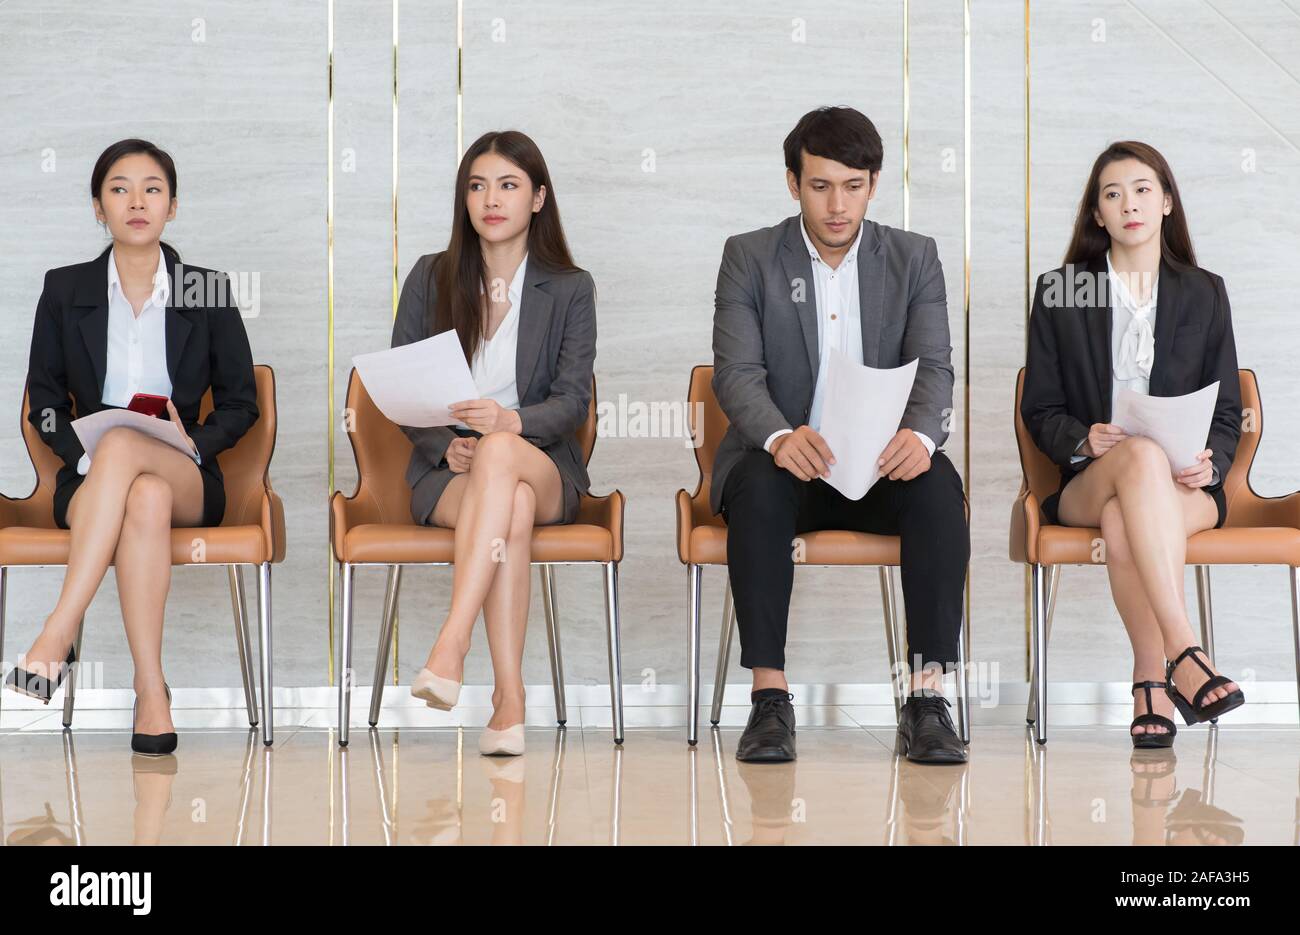 Asian business people are stressed about waiting for a job interview. Stock Photo